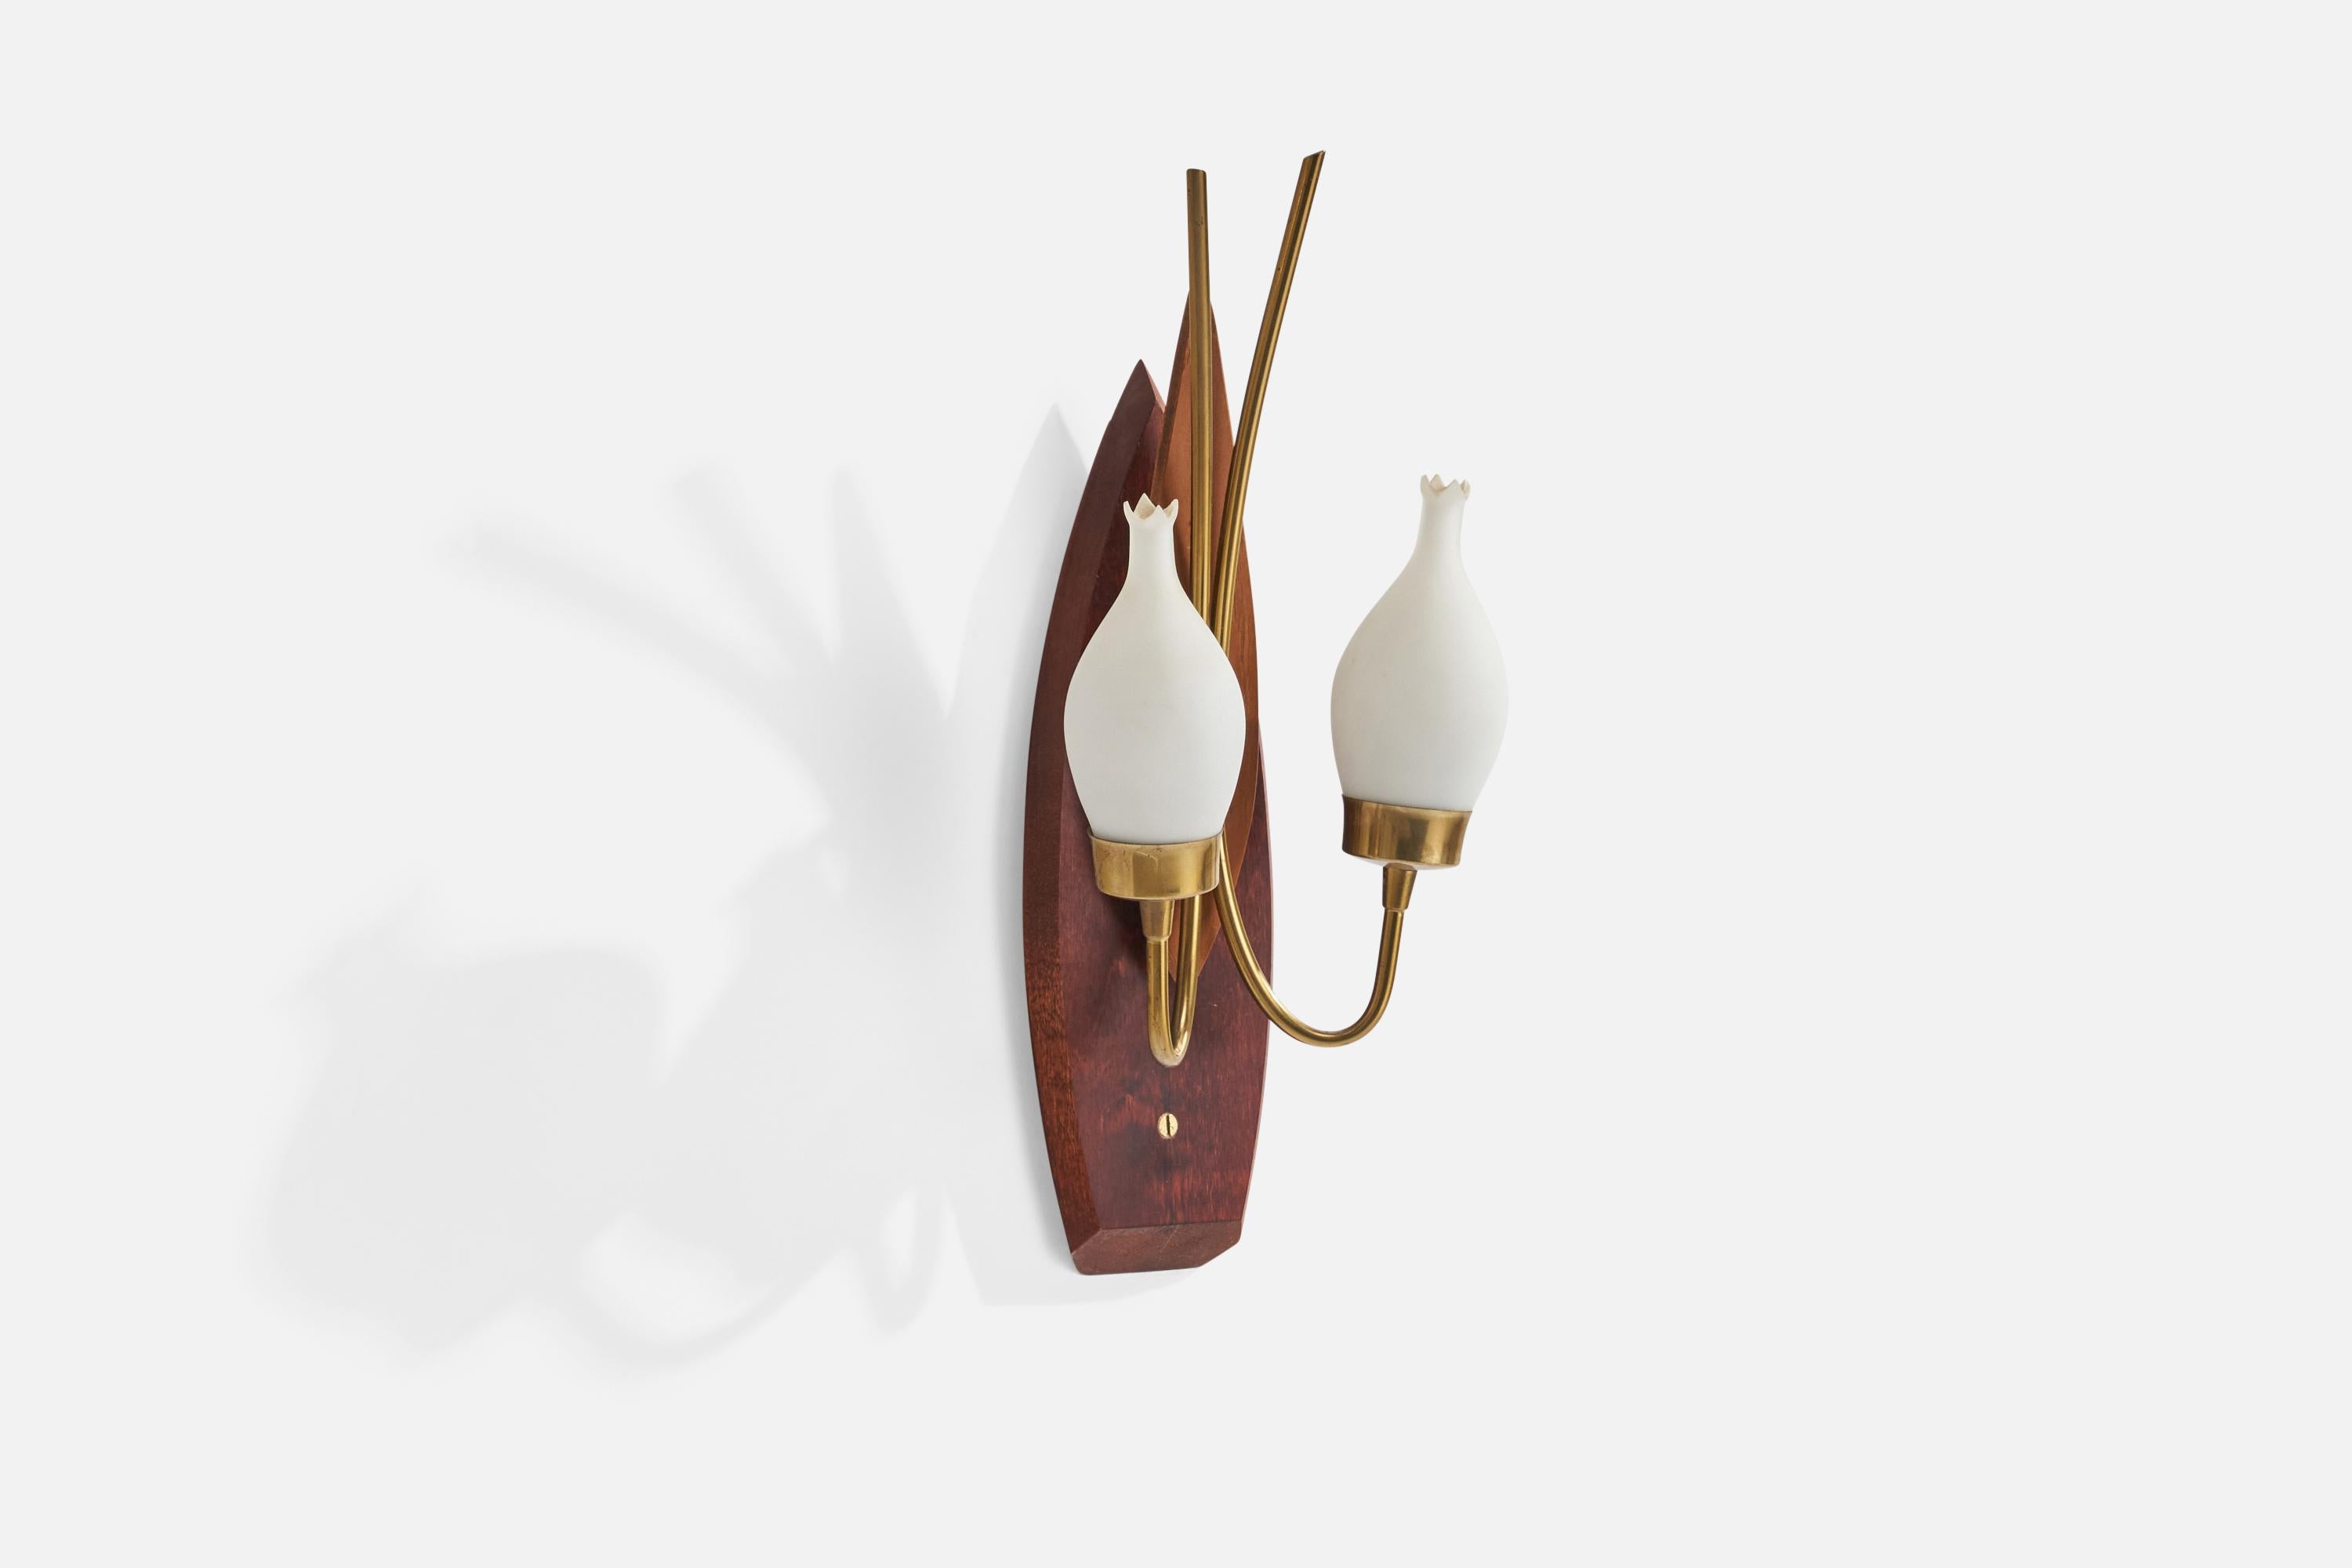 A teak, brass and opaline glass wall light designed and produced in Sweden, 1950s.

Overall Dimensions (inches): 17”  H x 7.5”  W x 5.5” D
Back Plate Dimensions (inches): 13.5” H x 4.5” W x 1.0”  D
Bulb Specifications: E-14 Bulb
Number of Sockets: